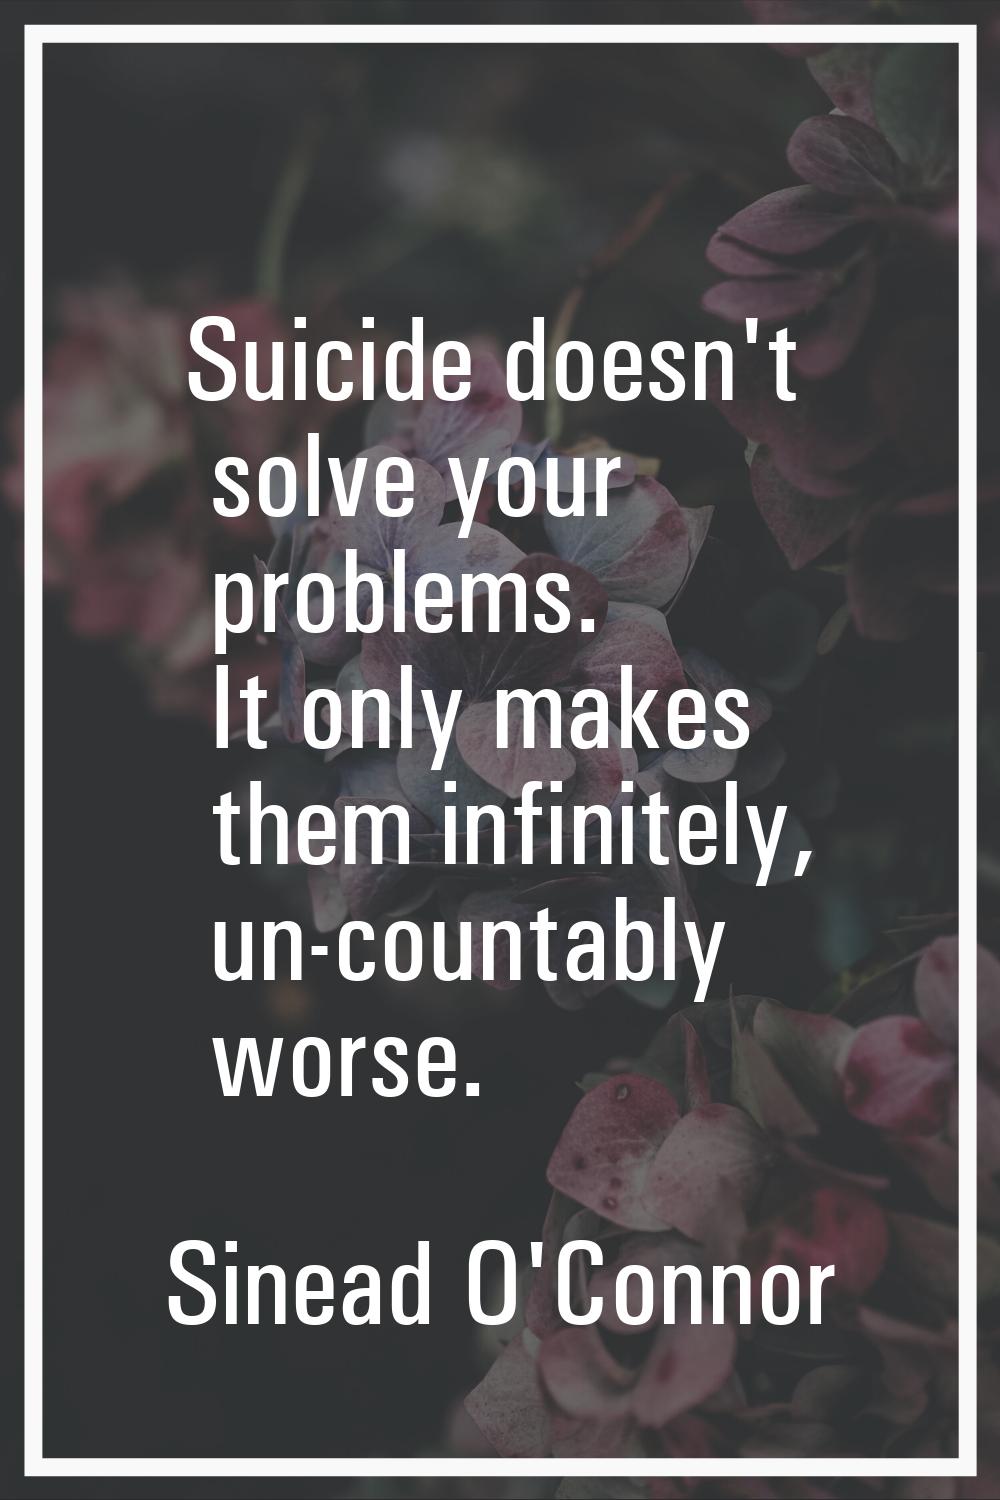 Suicide doesn't solve your problems. It only makes them infinitely, un-countably worse.